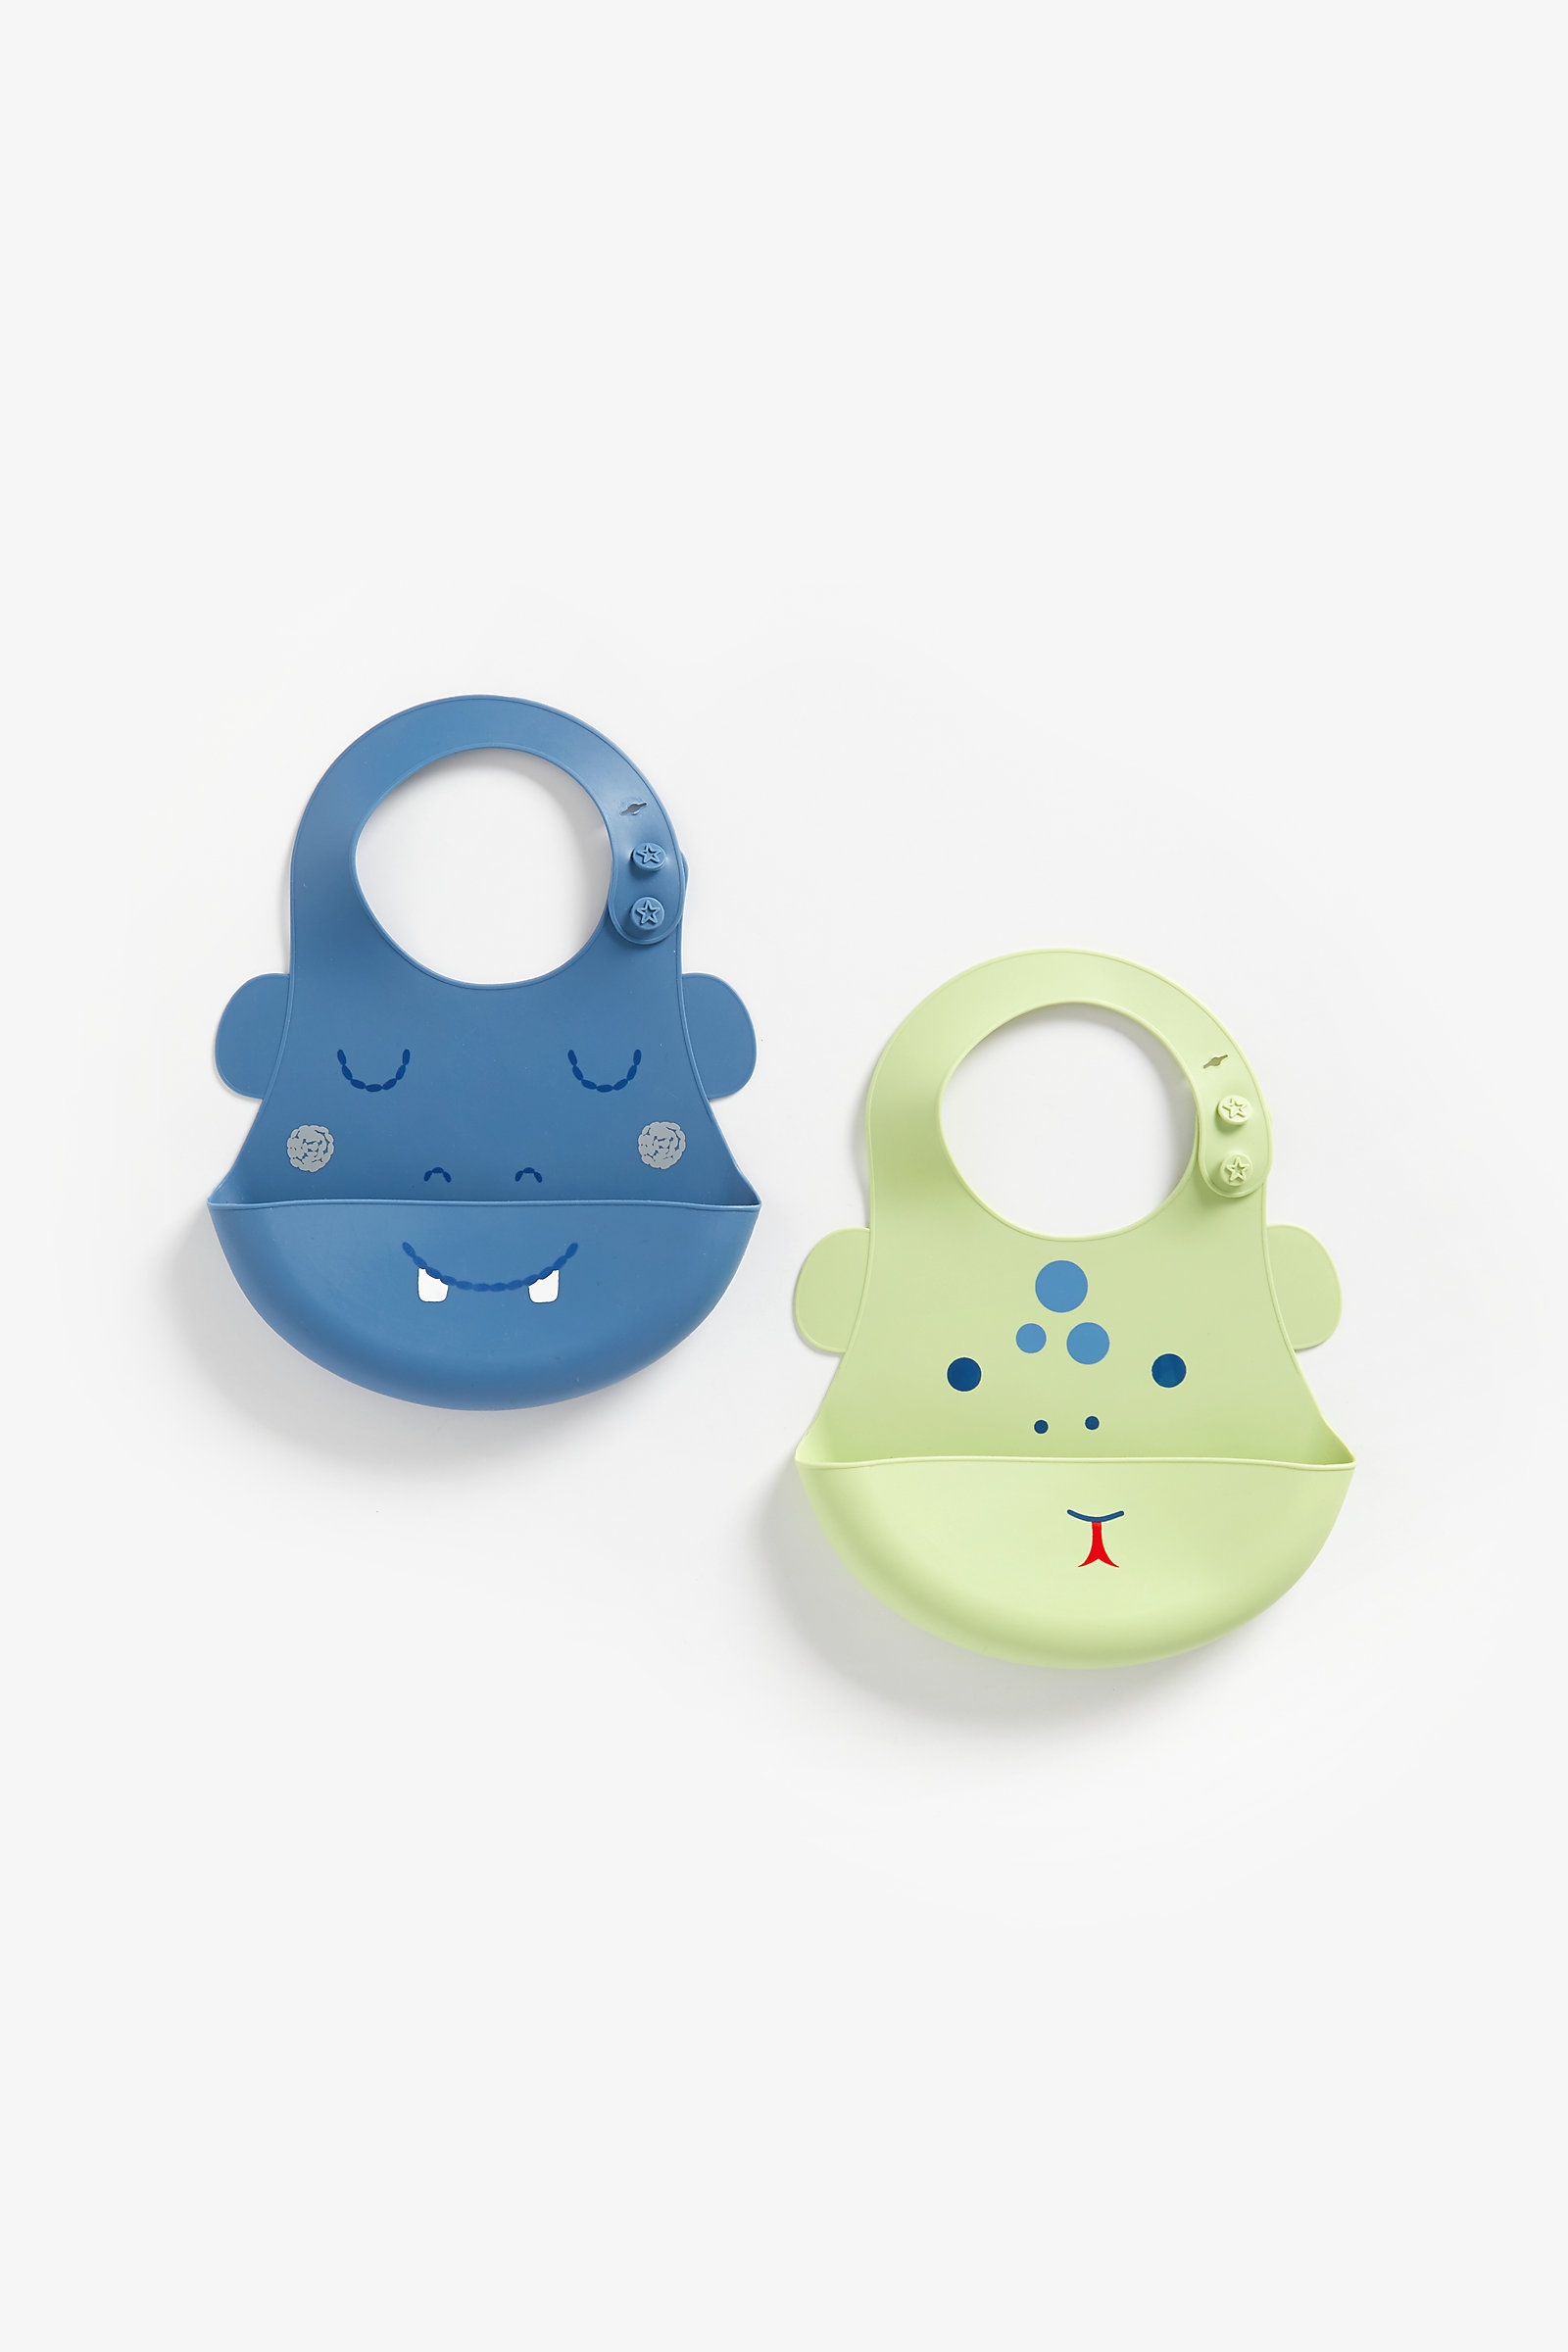 Mothercare Faces Crumb-catcher Blue Pack of 2